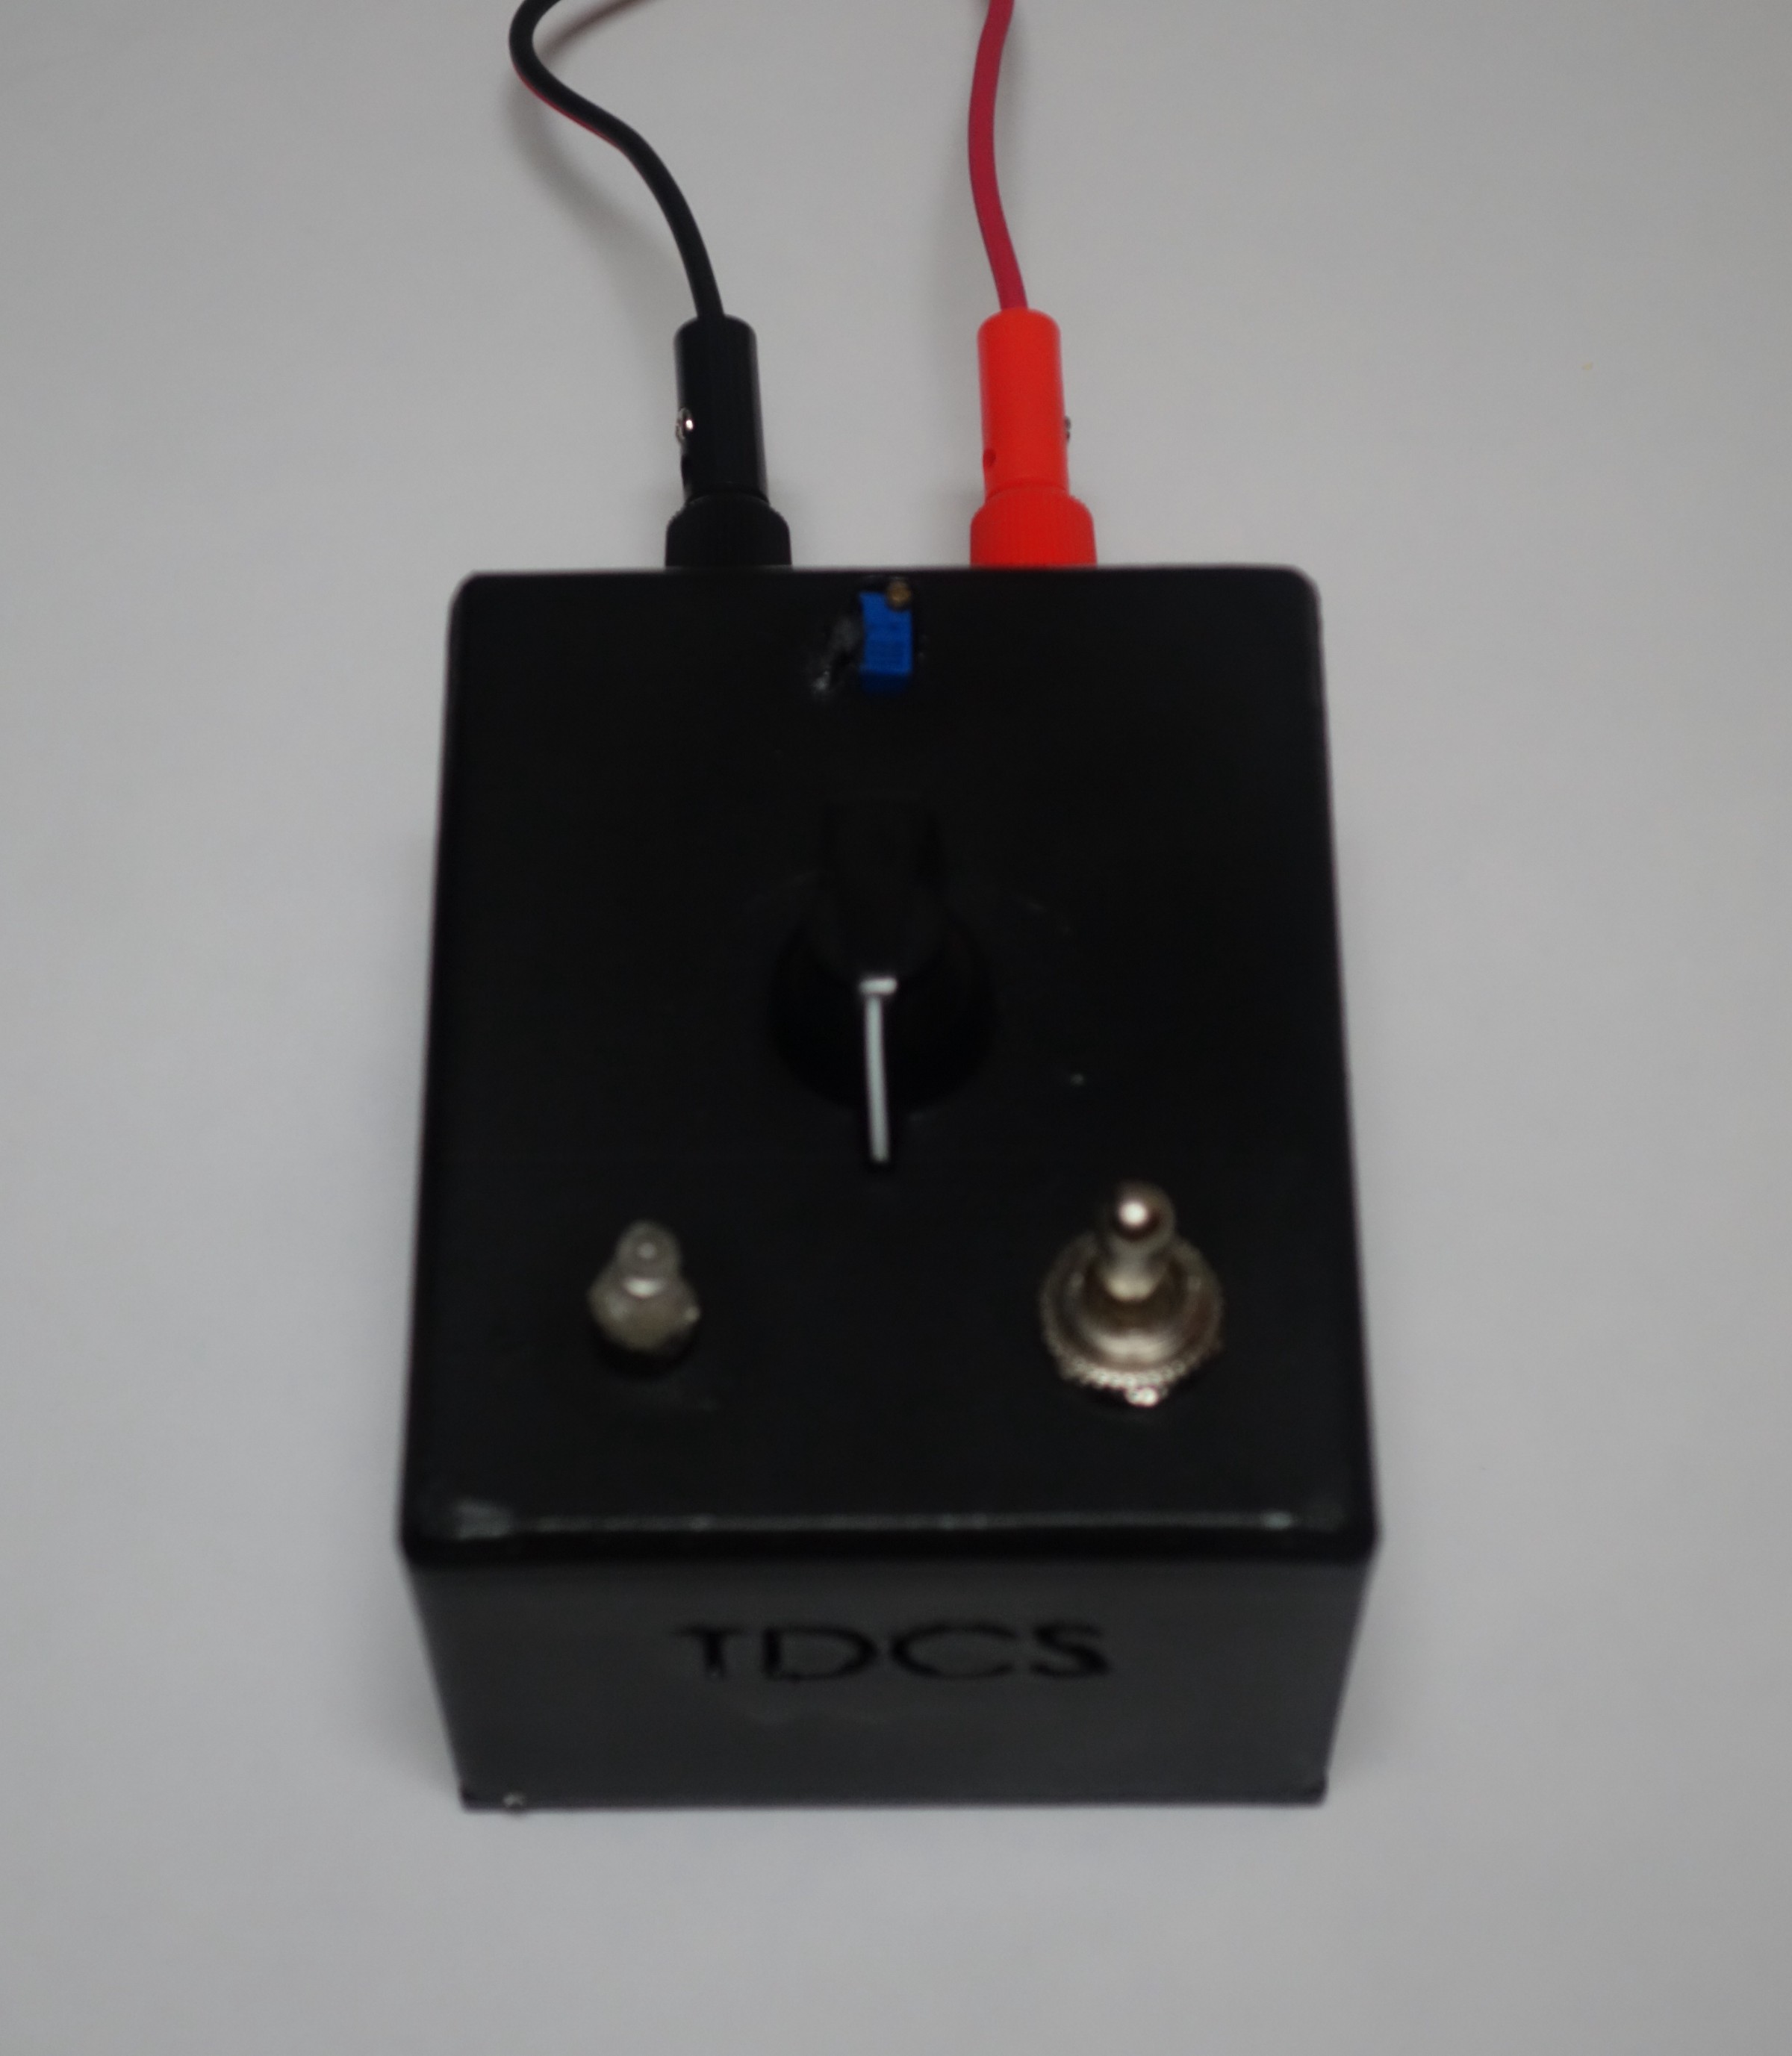 The TDCS device — fully assembled